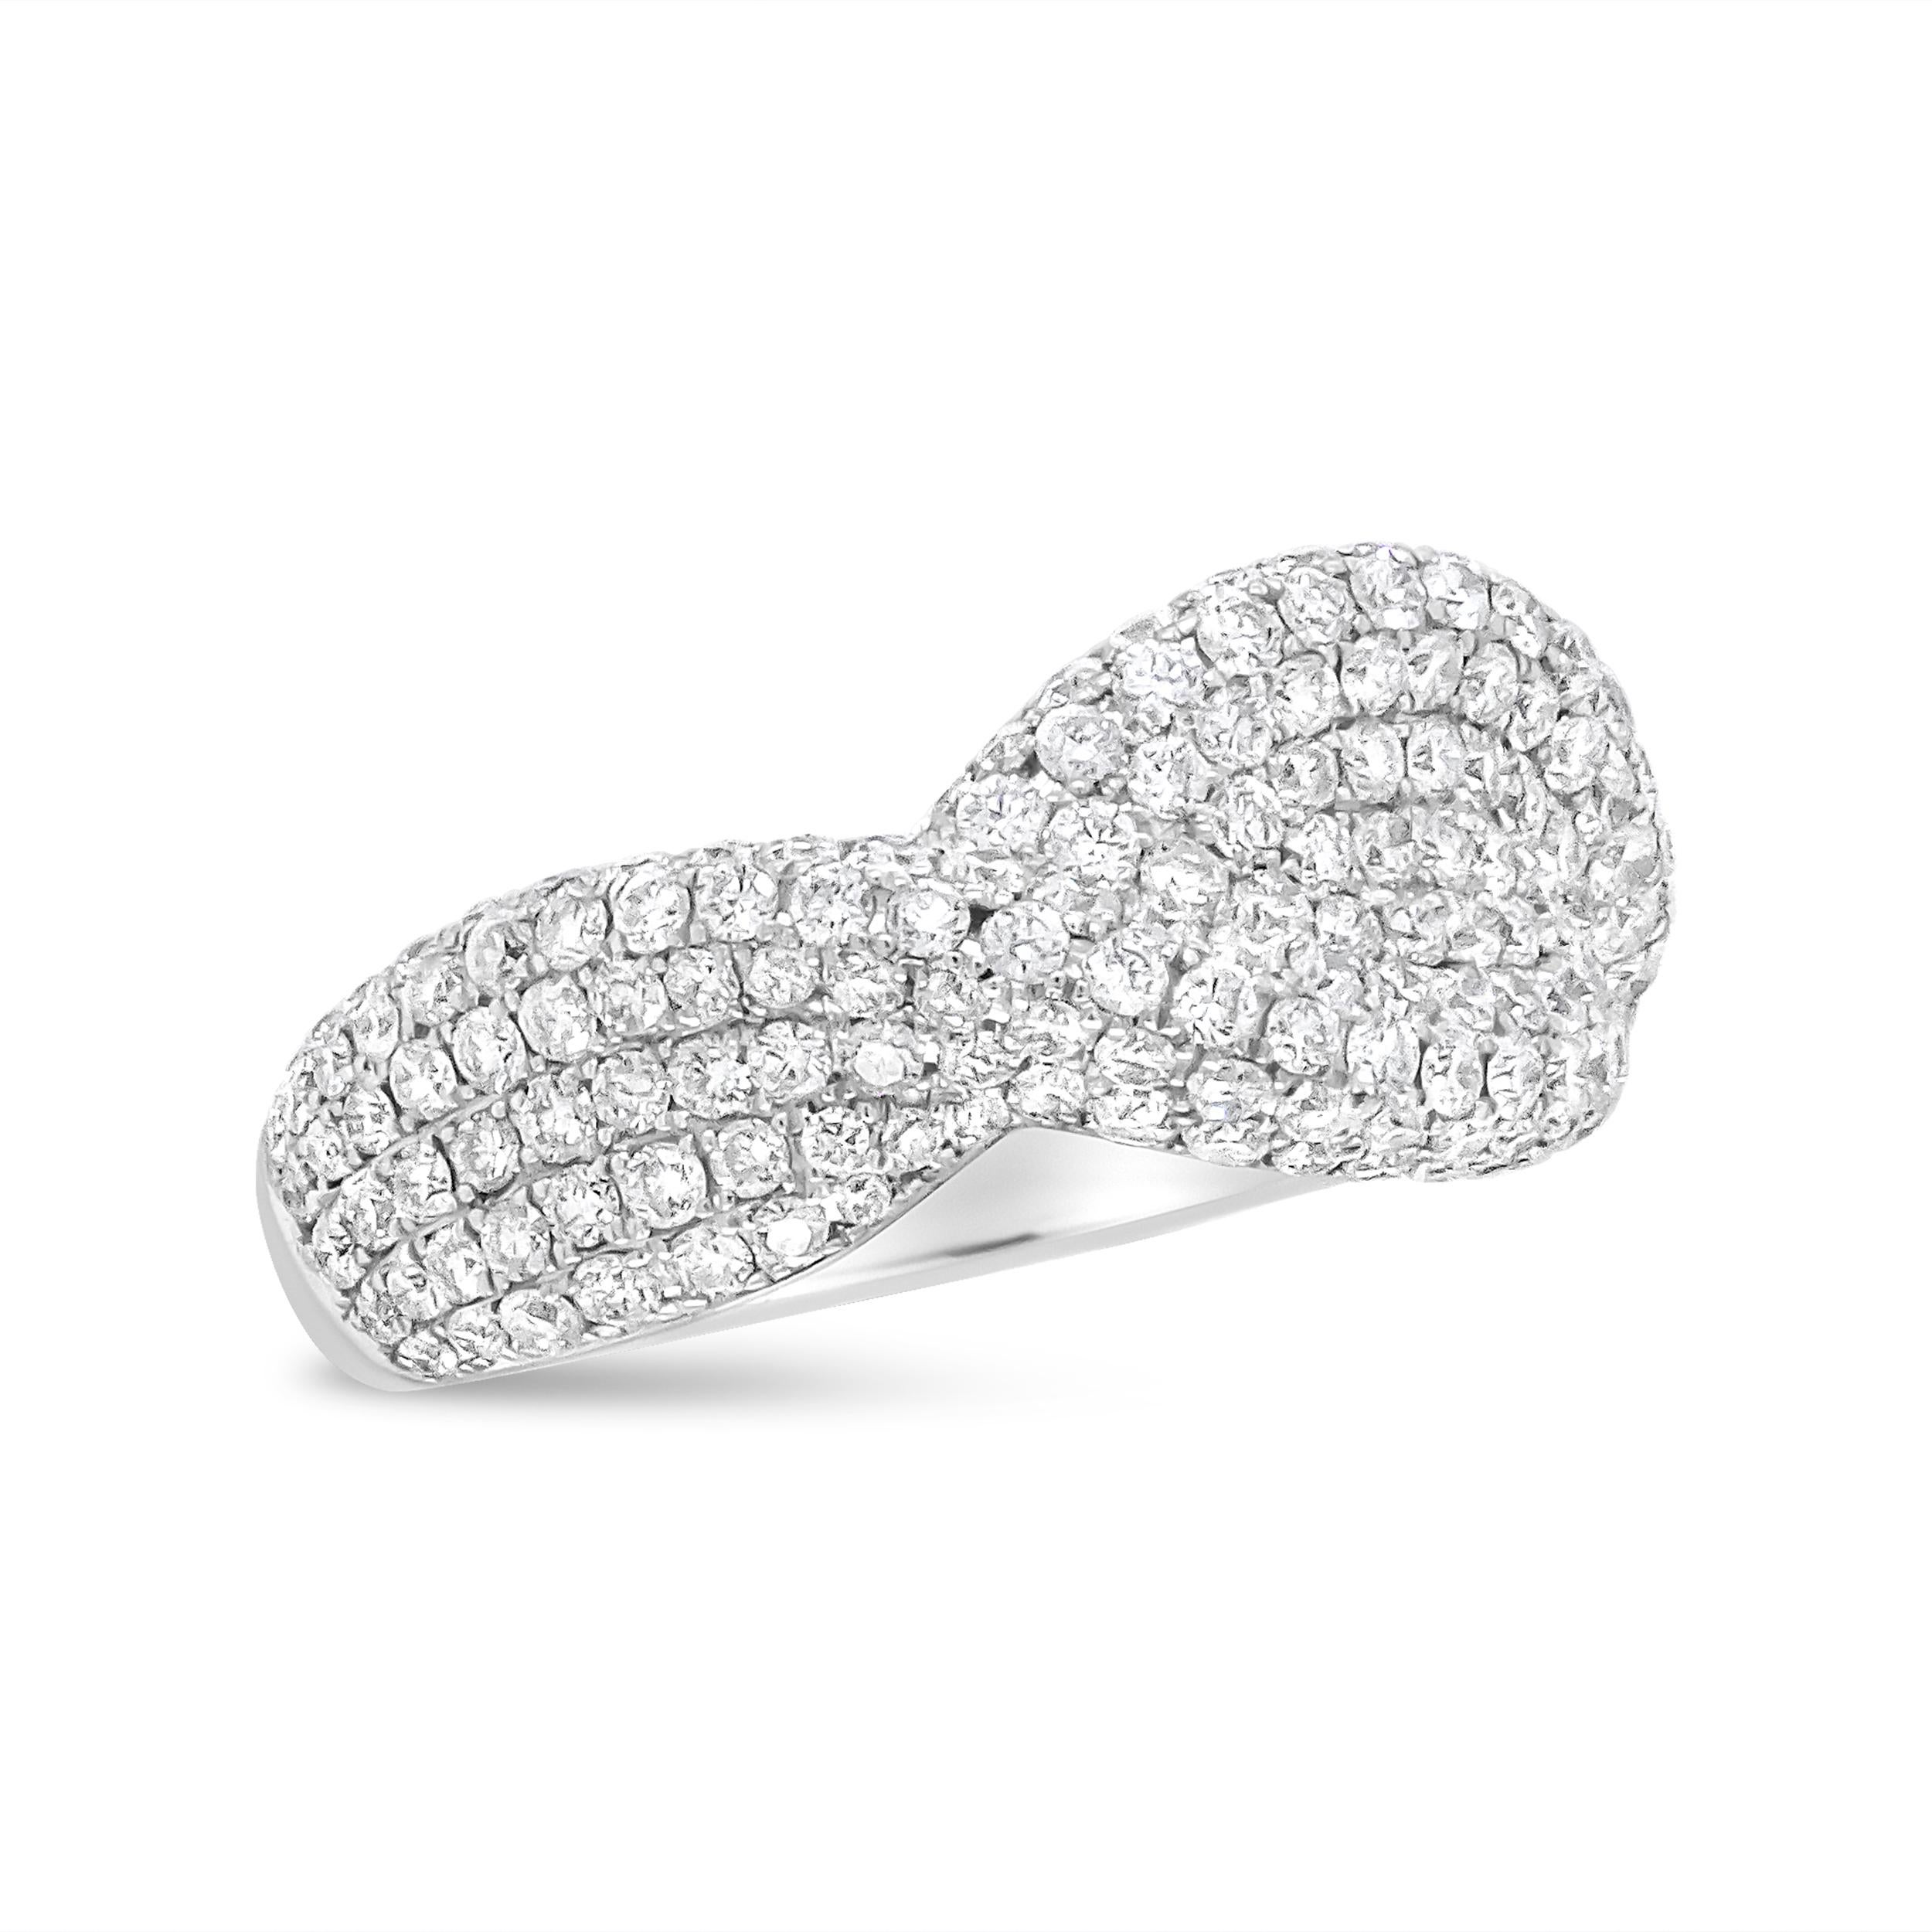 Intricately designed in a pattern reminiscent of an infinity loop, this glamorous 18k white gold band is embellished with a 2 1/4 cttw diamond cluster motif. Natural round-cut, white diamonds run across this piece in elegant prong and pave settings.